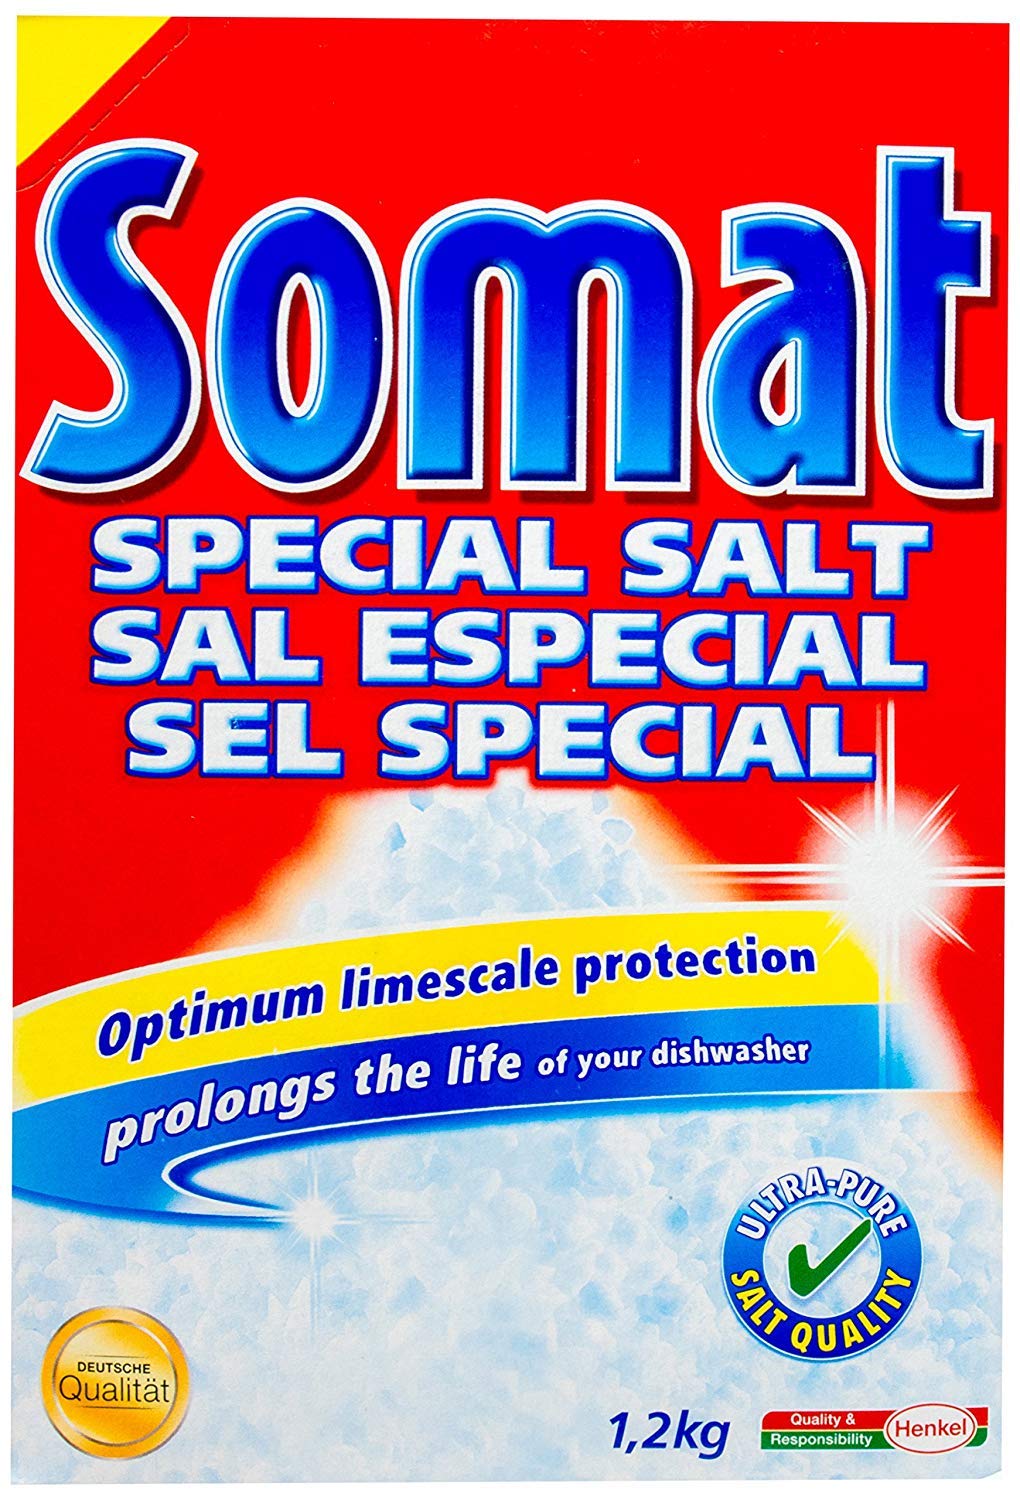 Somat Dishwasher Salt Water Softener - Special Salt Coarse-Grained - Lime Protection, Ensures Soft Water, Anti-Water Stains, Prolongs The Life of The Dishwasher, 1.2 KG (2.6 LB), 2 Pack